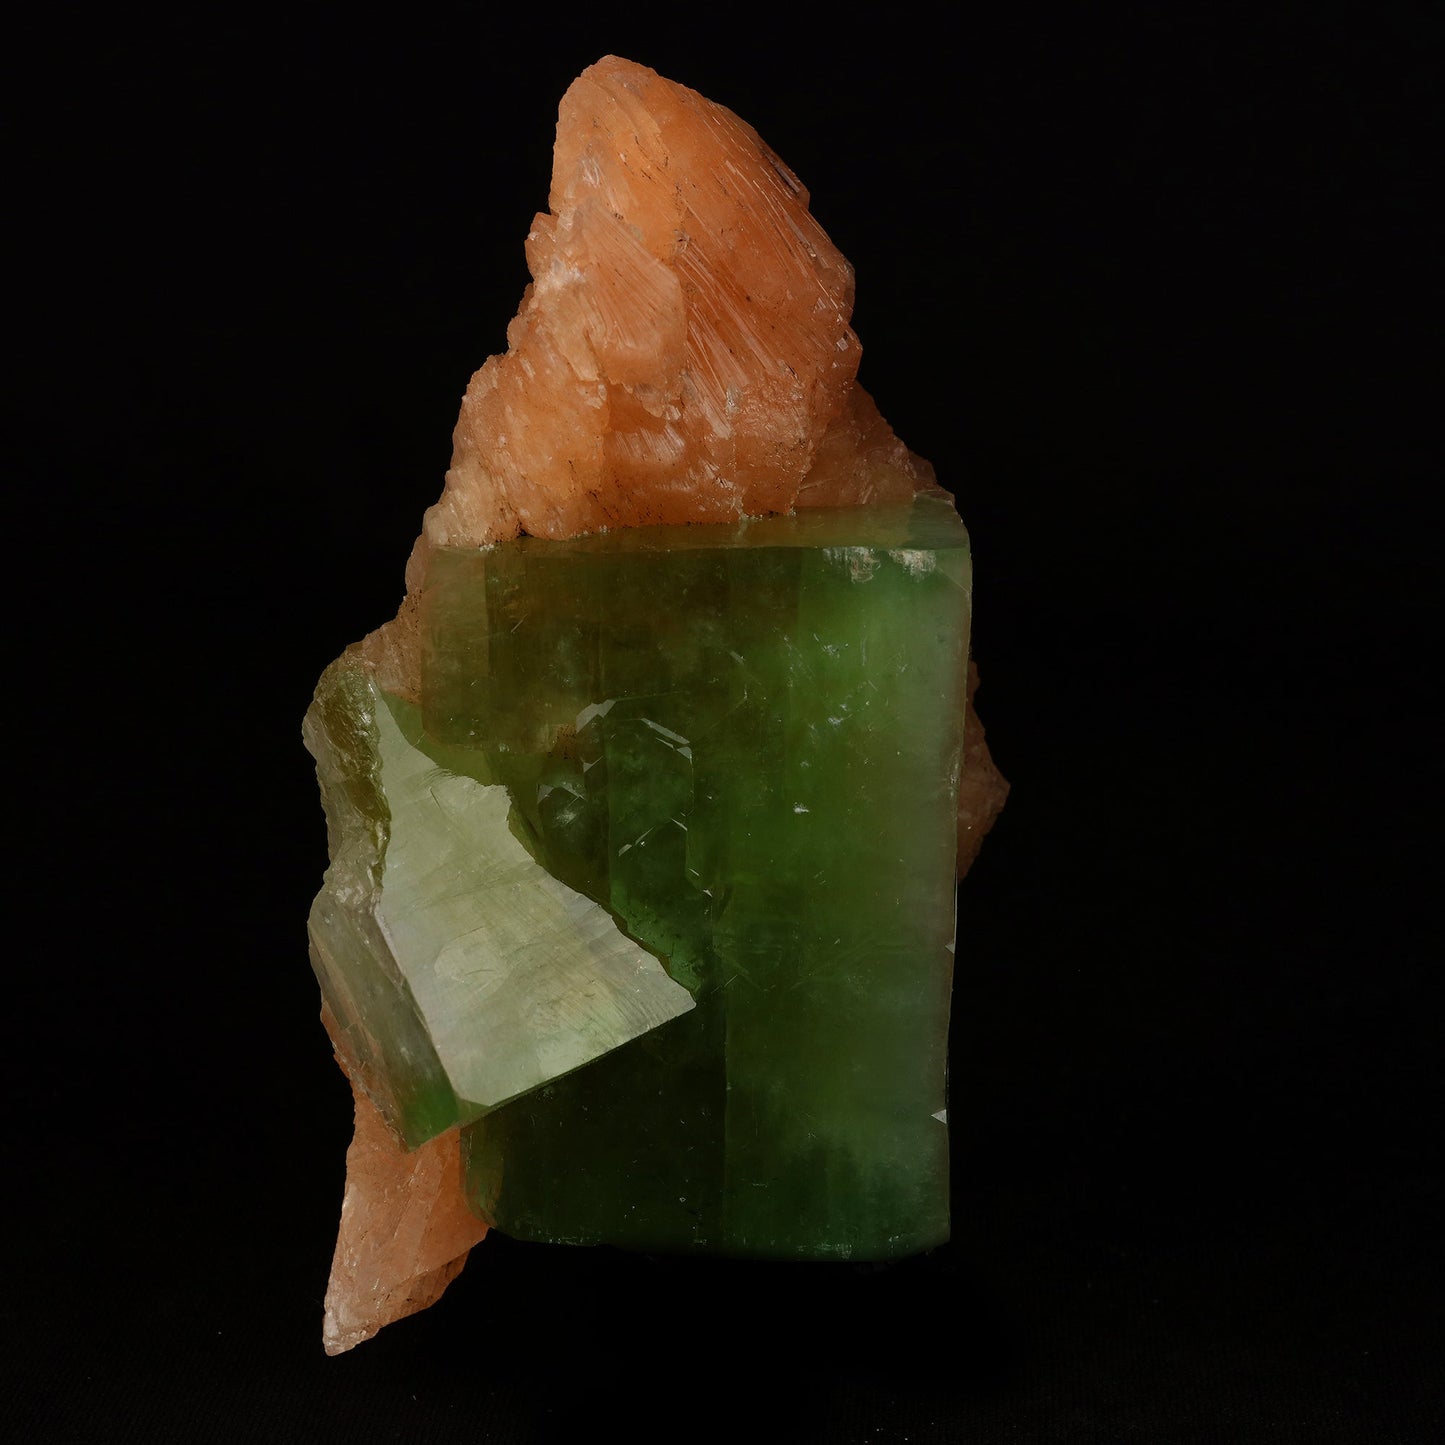 Green Apophyllite Cube With Stilbite Natural Mineral Specimen # B 508…  https://www.superbminerals.us/products/green-apophyllite-cube-with-stilbite-natural-mineral-specimen-b-5080  Features: A striking, large blocky, color-zoned apophyllite crystal aesthetically flanked by similar smaller crystals dramatically highlights this impressive large mounded combination from recent finds in Jalgaon. The glassy, translucent tetragonal apophyllites have rich mint-green centers and colorless terminations